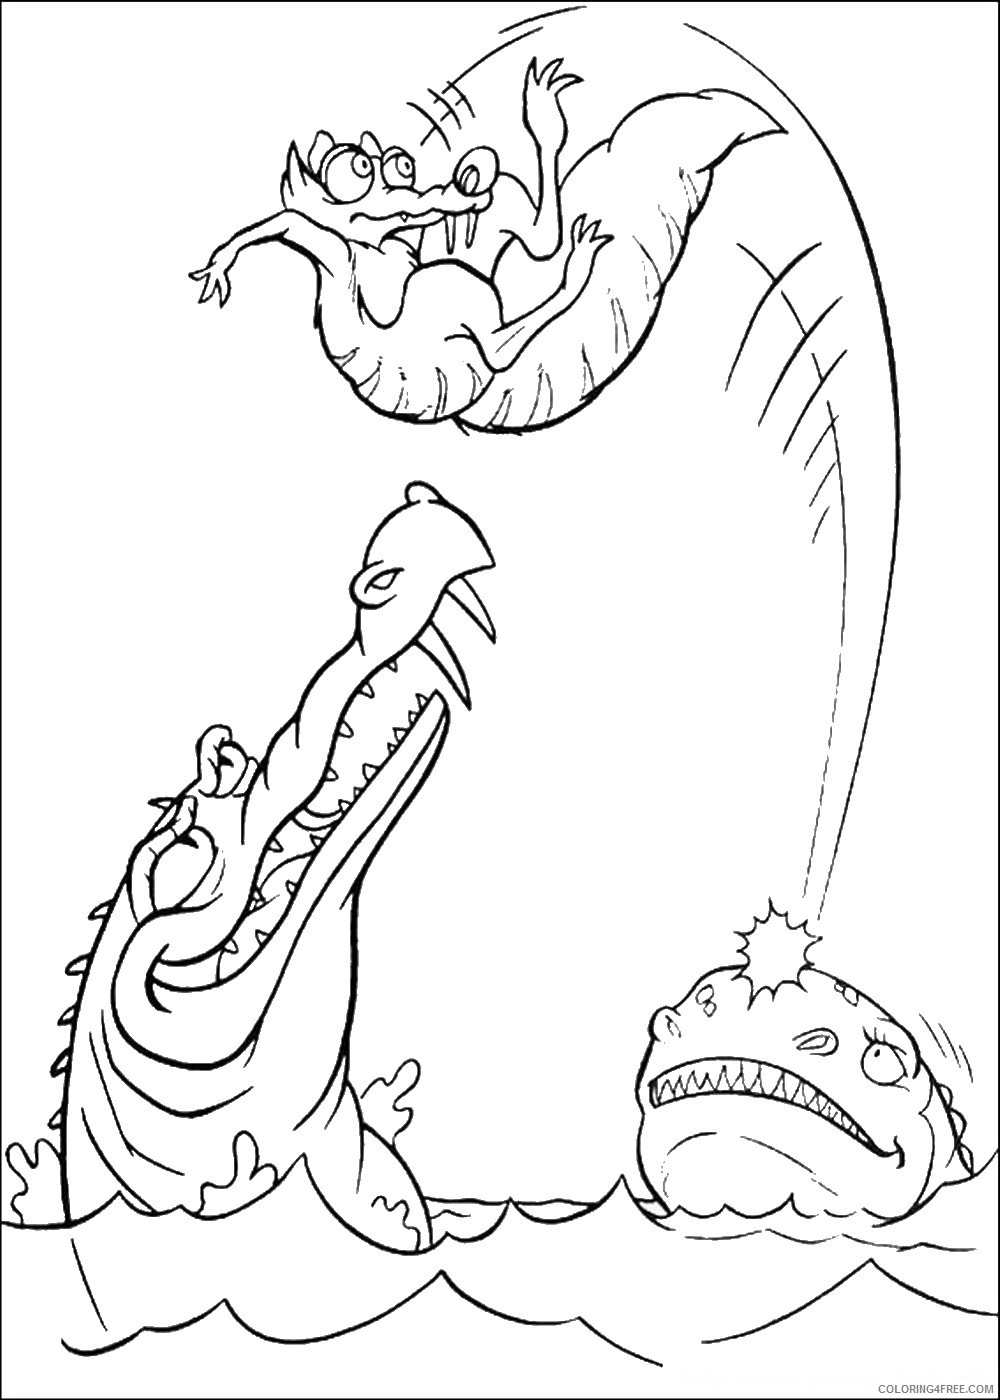 Ice Age Coloring Pages Cartoons ice age 20 Printable 2020 3389 Coloring4free